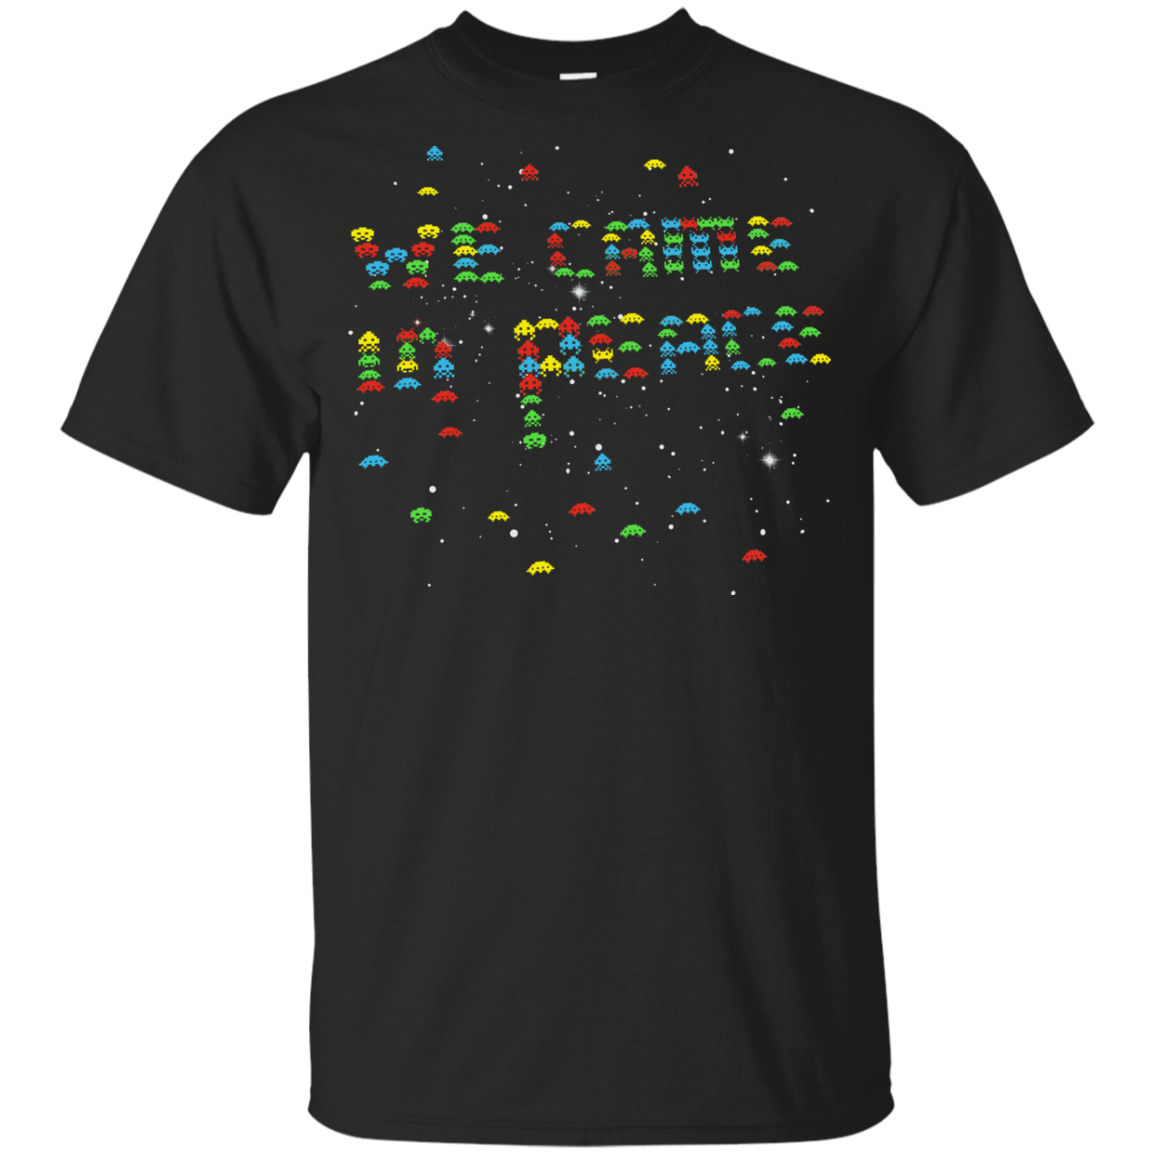 T-Shirts Black / YXS We came in peace Youth T-Shirt